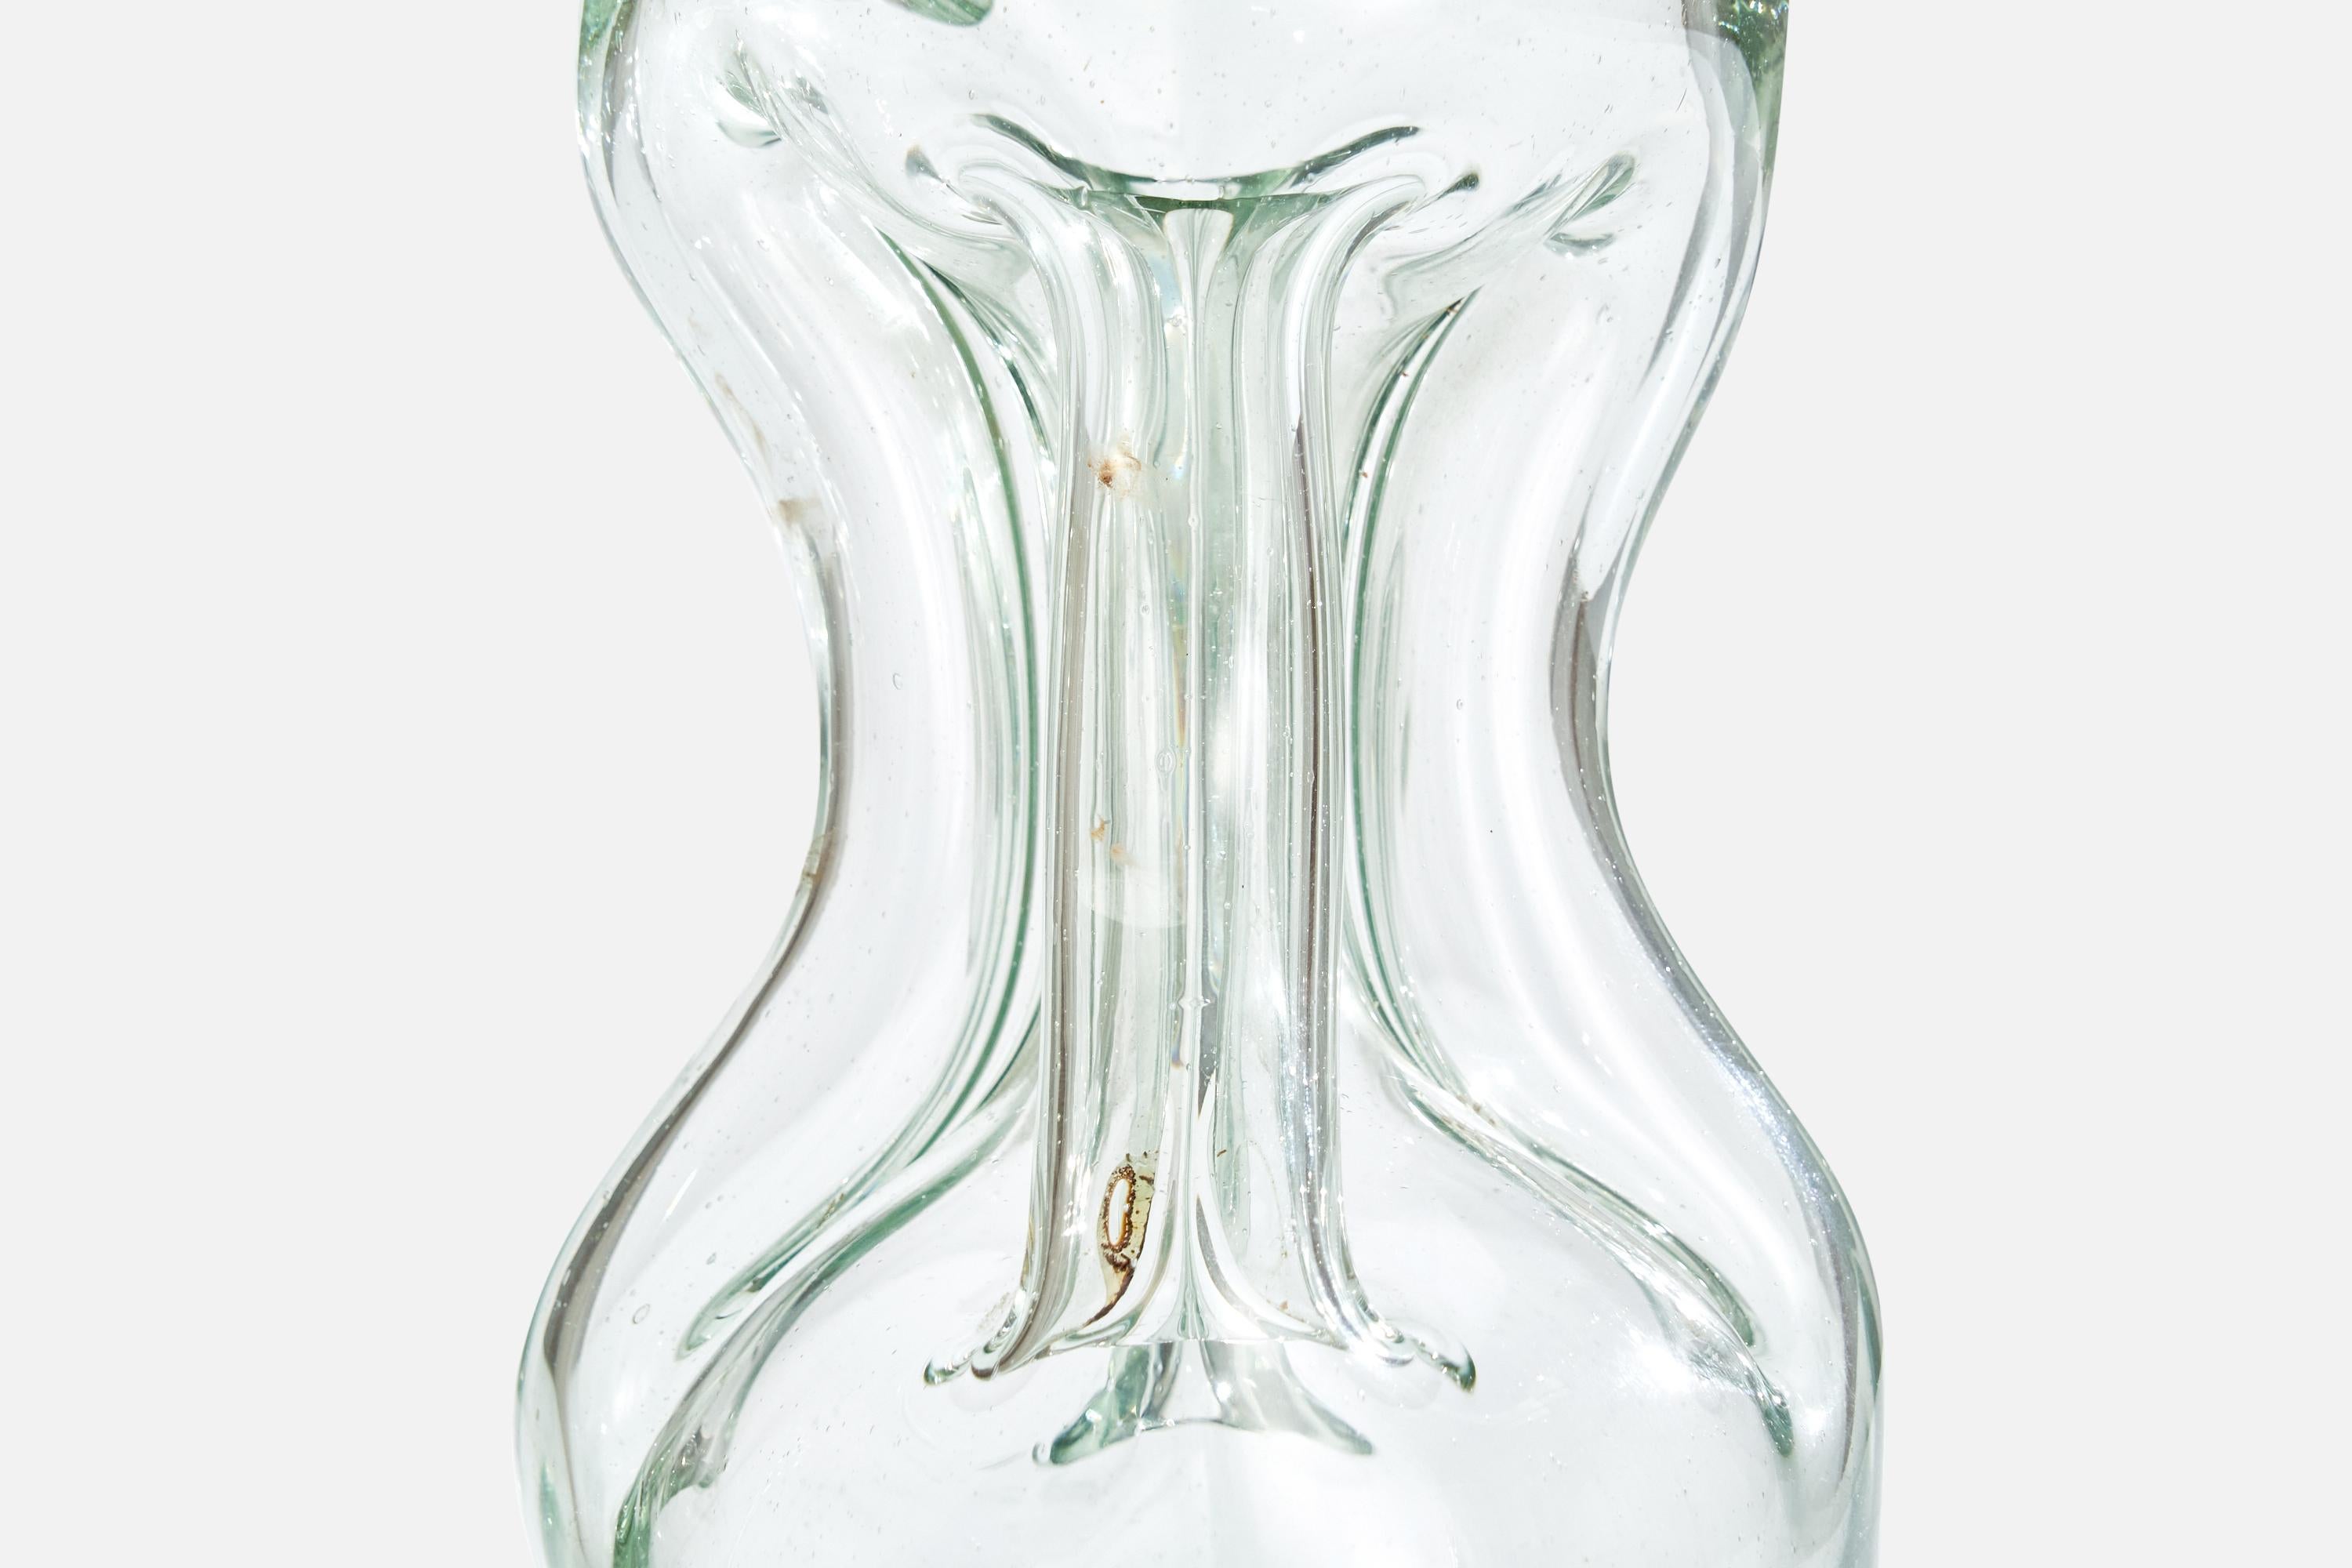 Blown Glass Ture Berglund, Bottle, Glass, Sweden, 1940s For Sale